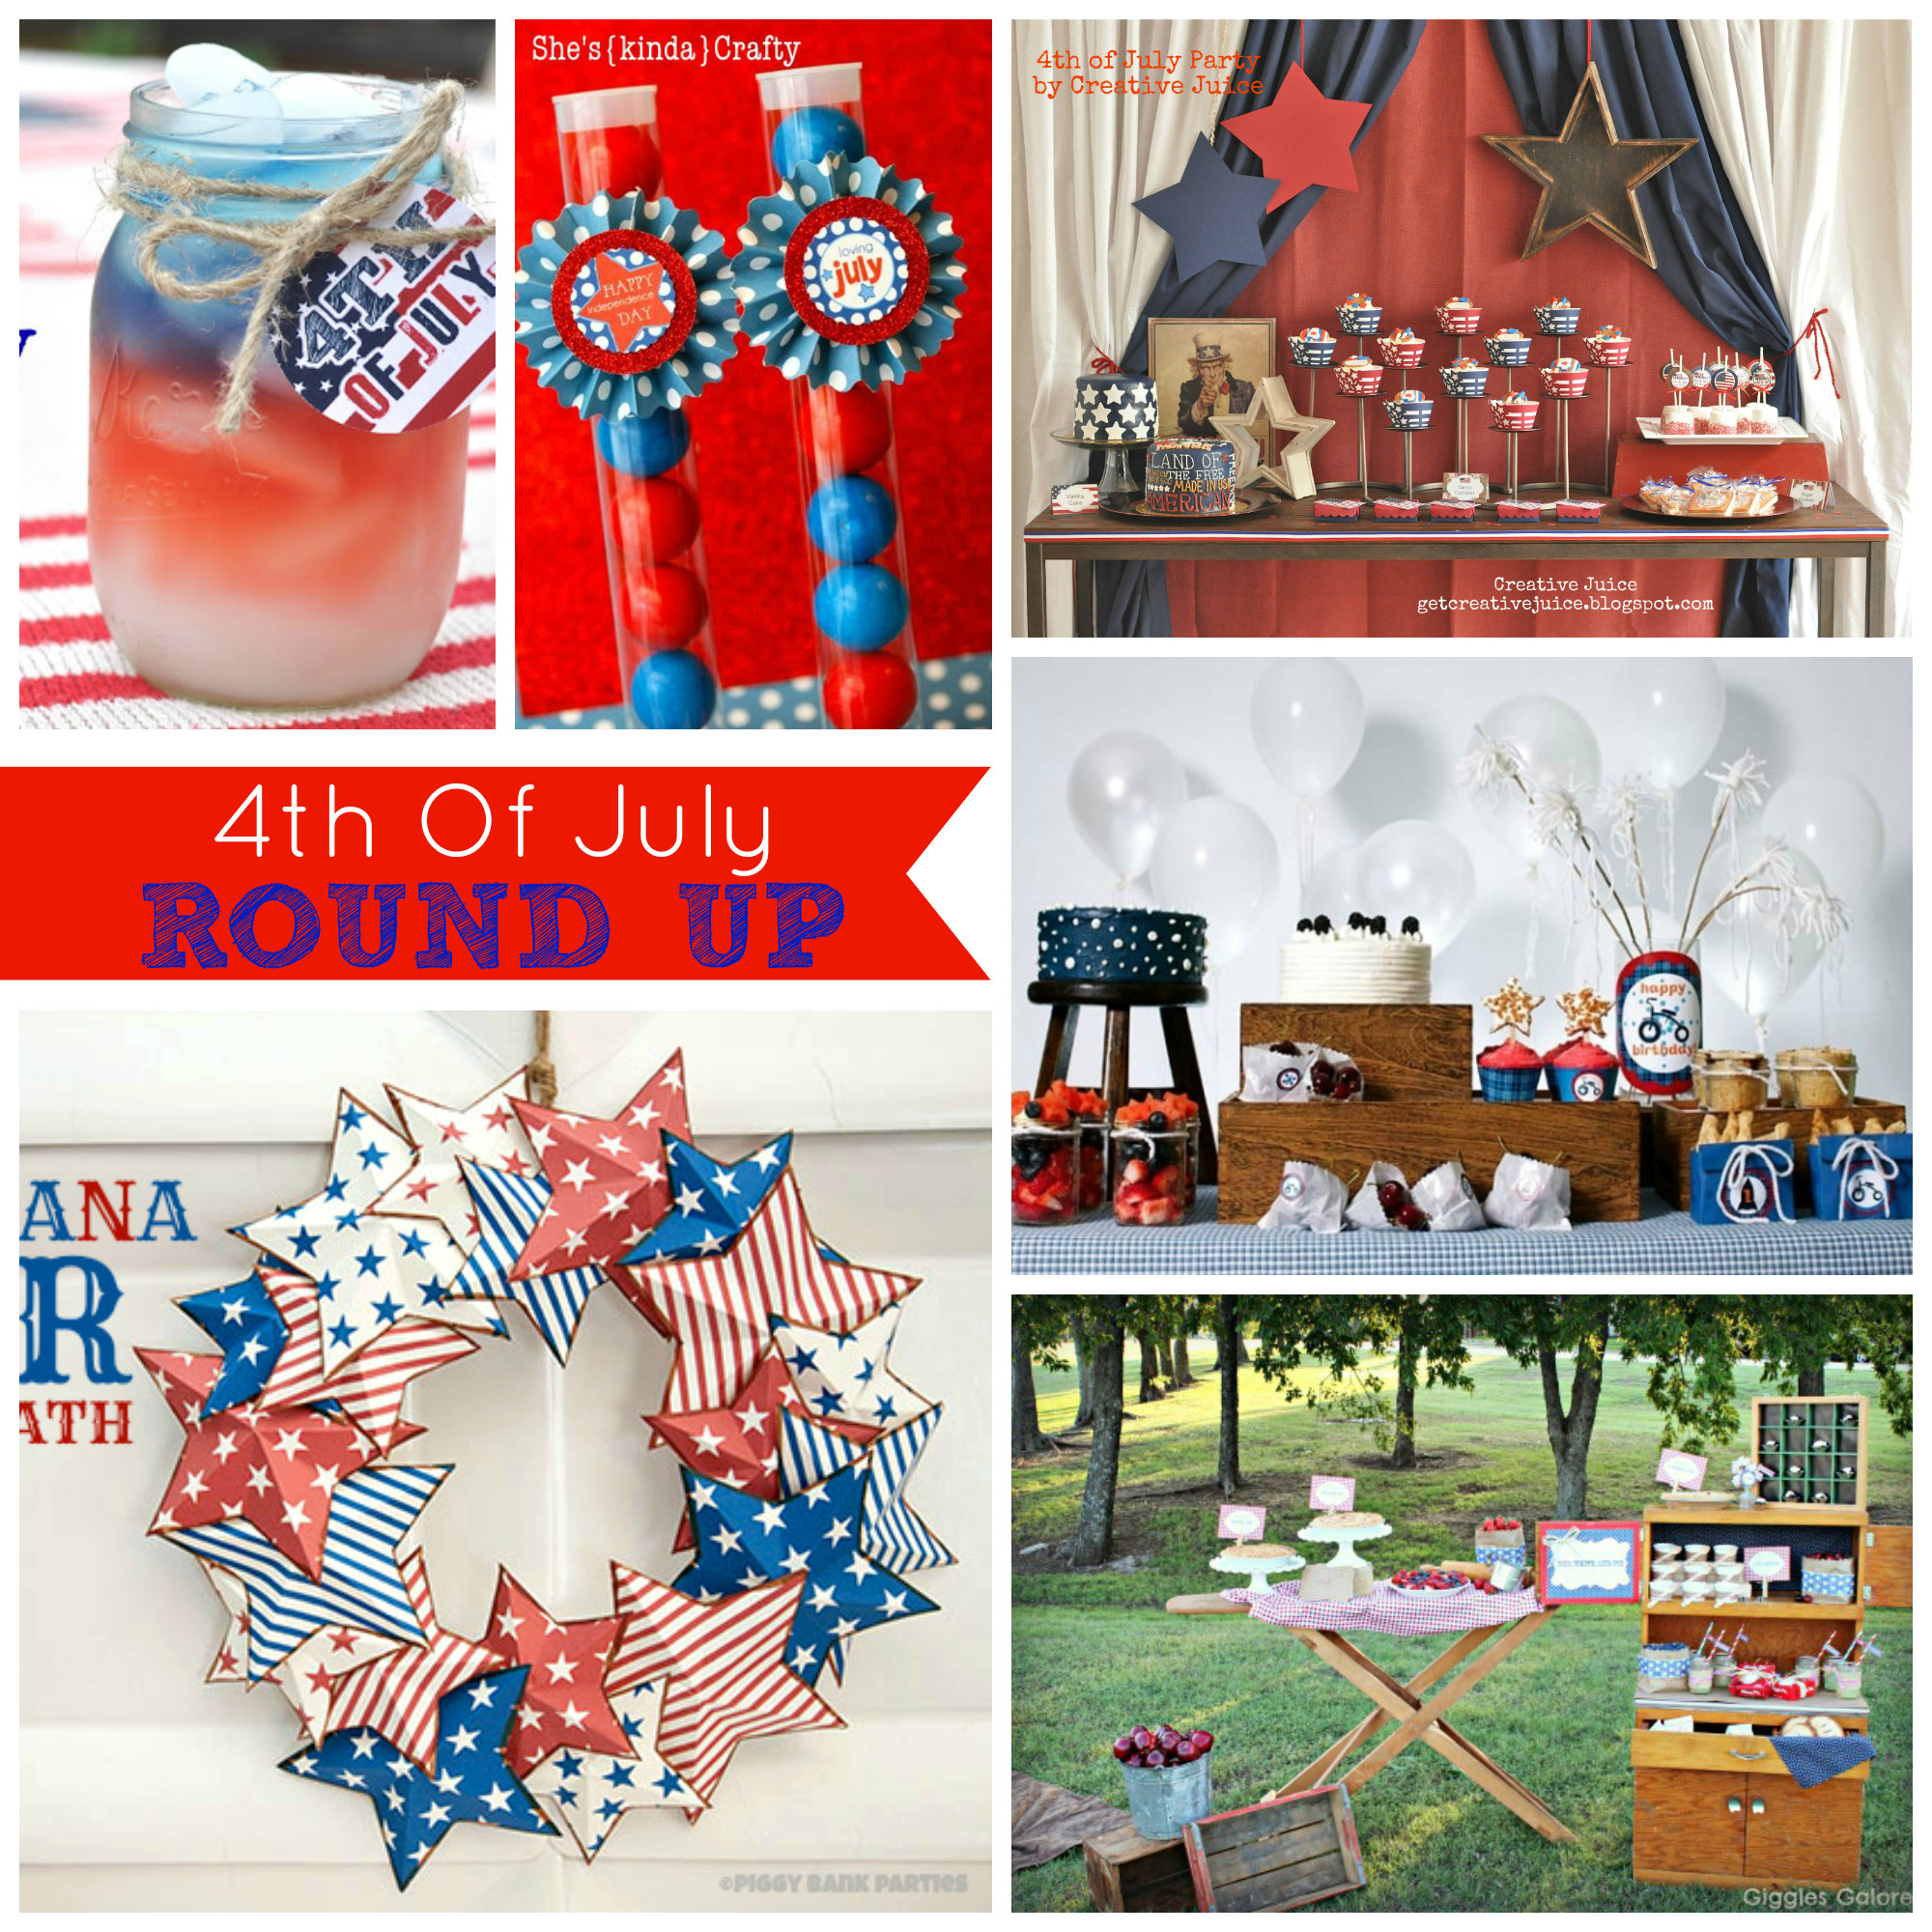 4th Of July Party Ideas For Adults
 ROUND UP 4th of july party ideas Creative Juice